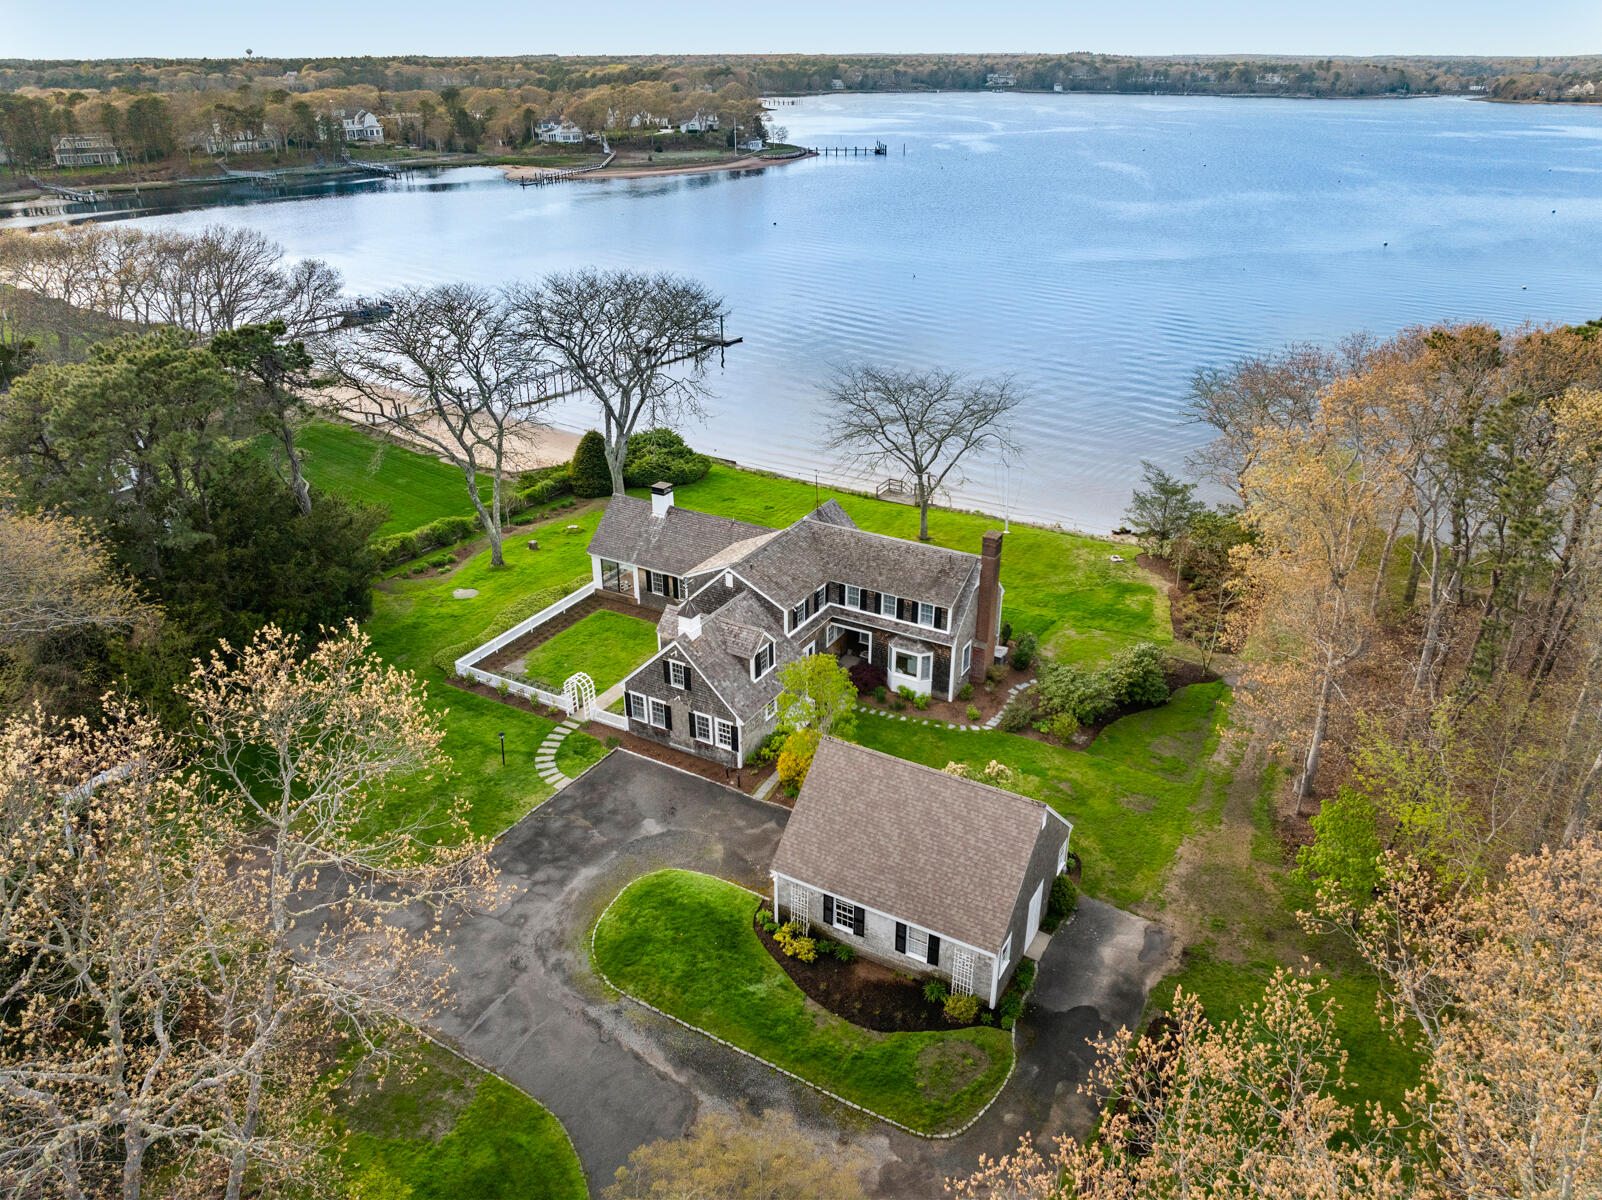 104 Great Bay Road, Osterville, Massachusetts 02655, 4 Bedrooms Bedrooms, 13 Rooms Rooms,4 BathroomsBathrooms,Residential,For Sale,104 Great Bay Road,22401937